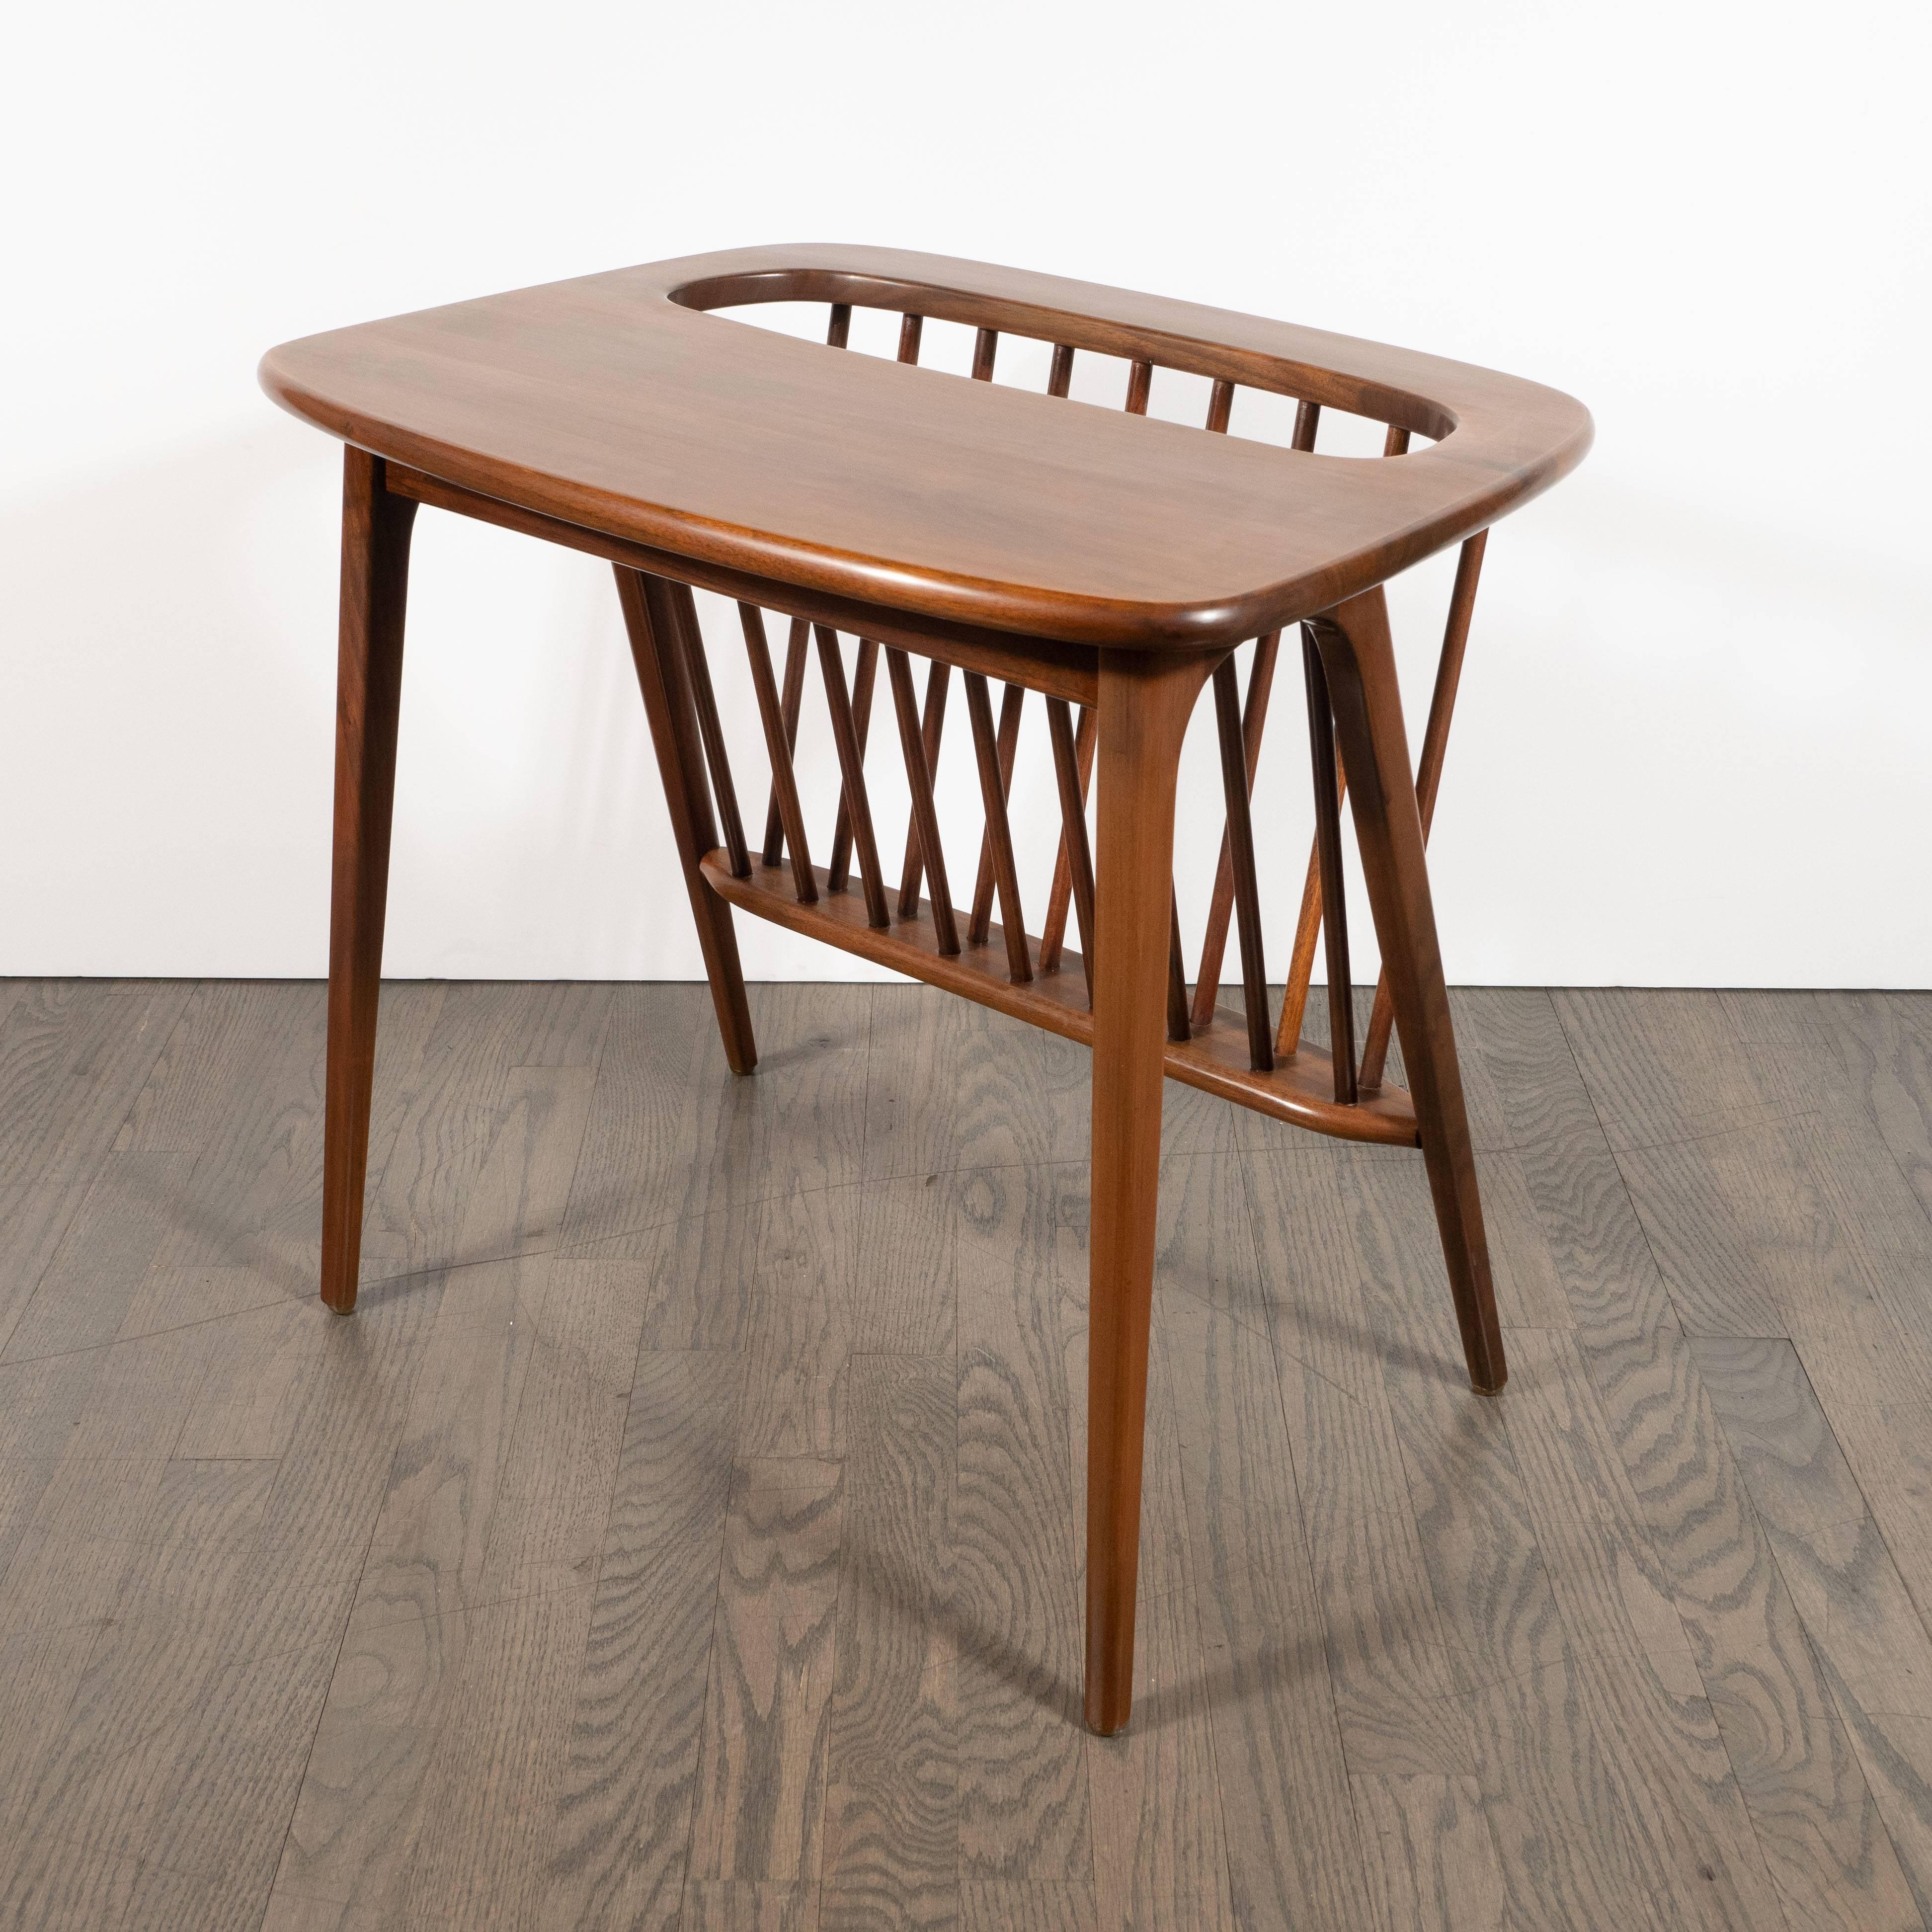 This elegant and graphic Mid-Century Modern hand rubbed book matched walnut magazine holder/ side table was realized in the United States, circa 1960. It features splayed legs of divergent angles that connect at a curvilinear U-form joint that